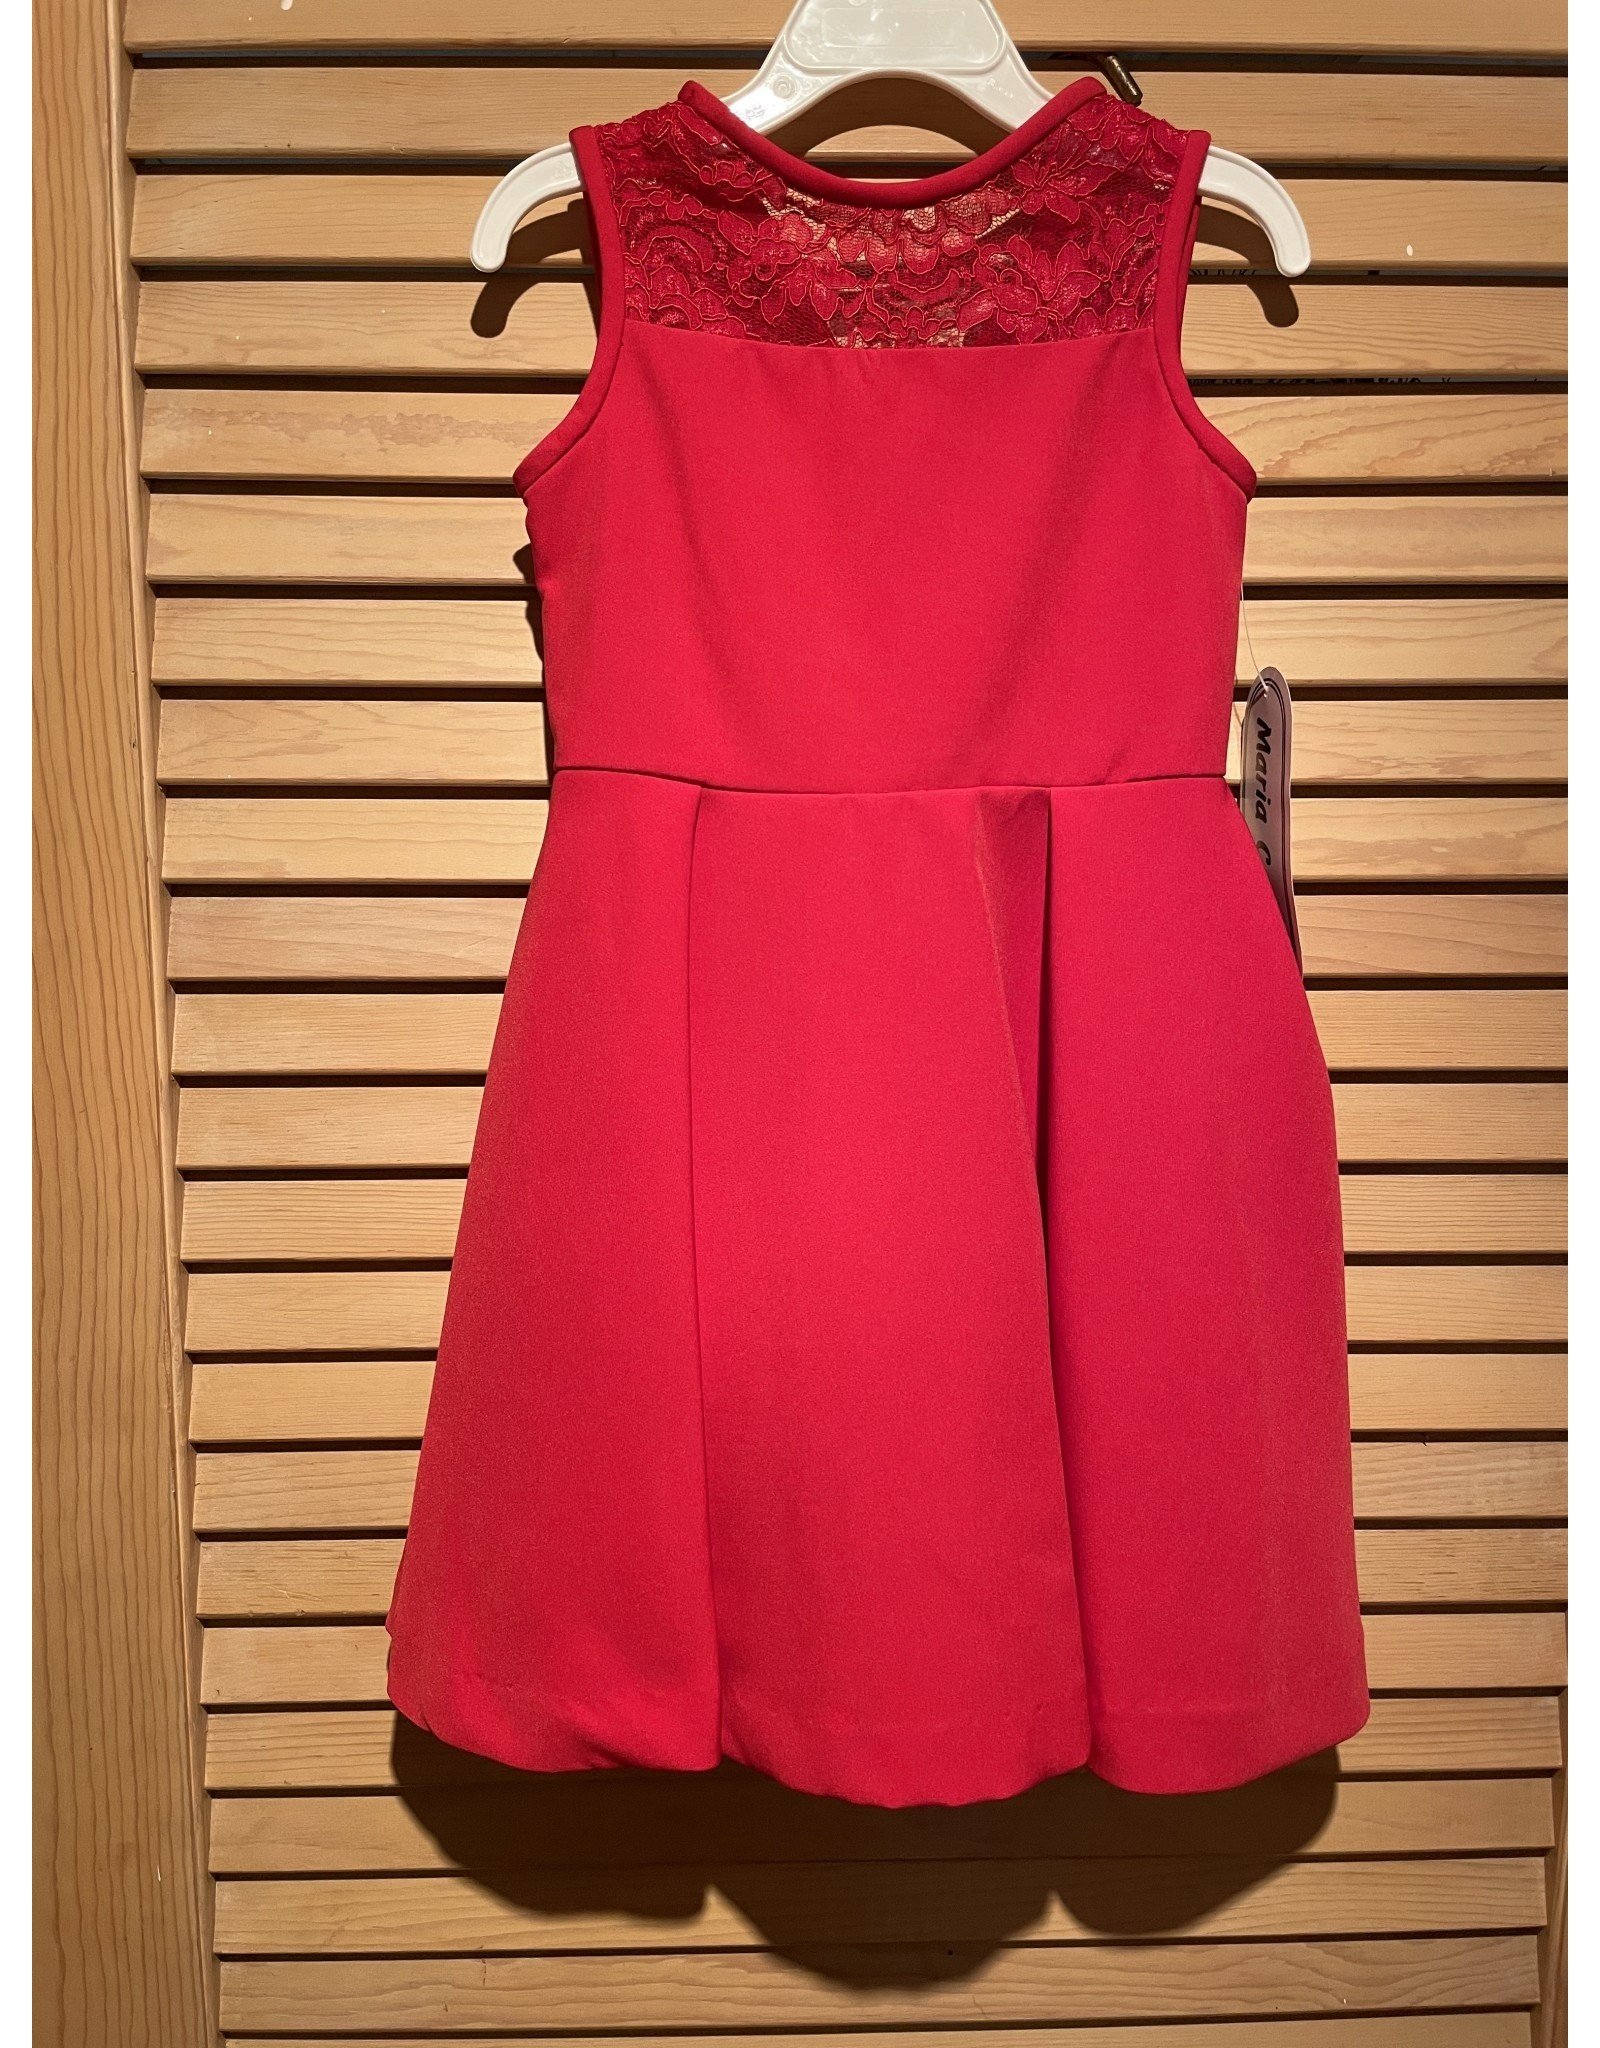 Casero Red Dress with Lace Shoulder Strap